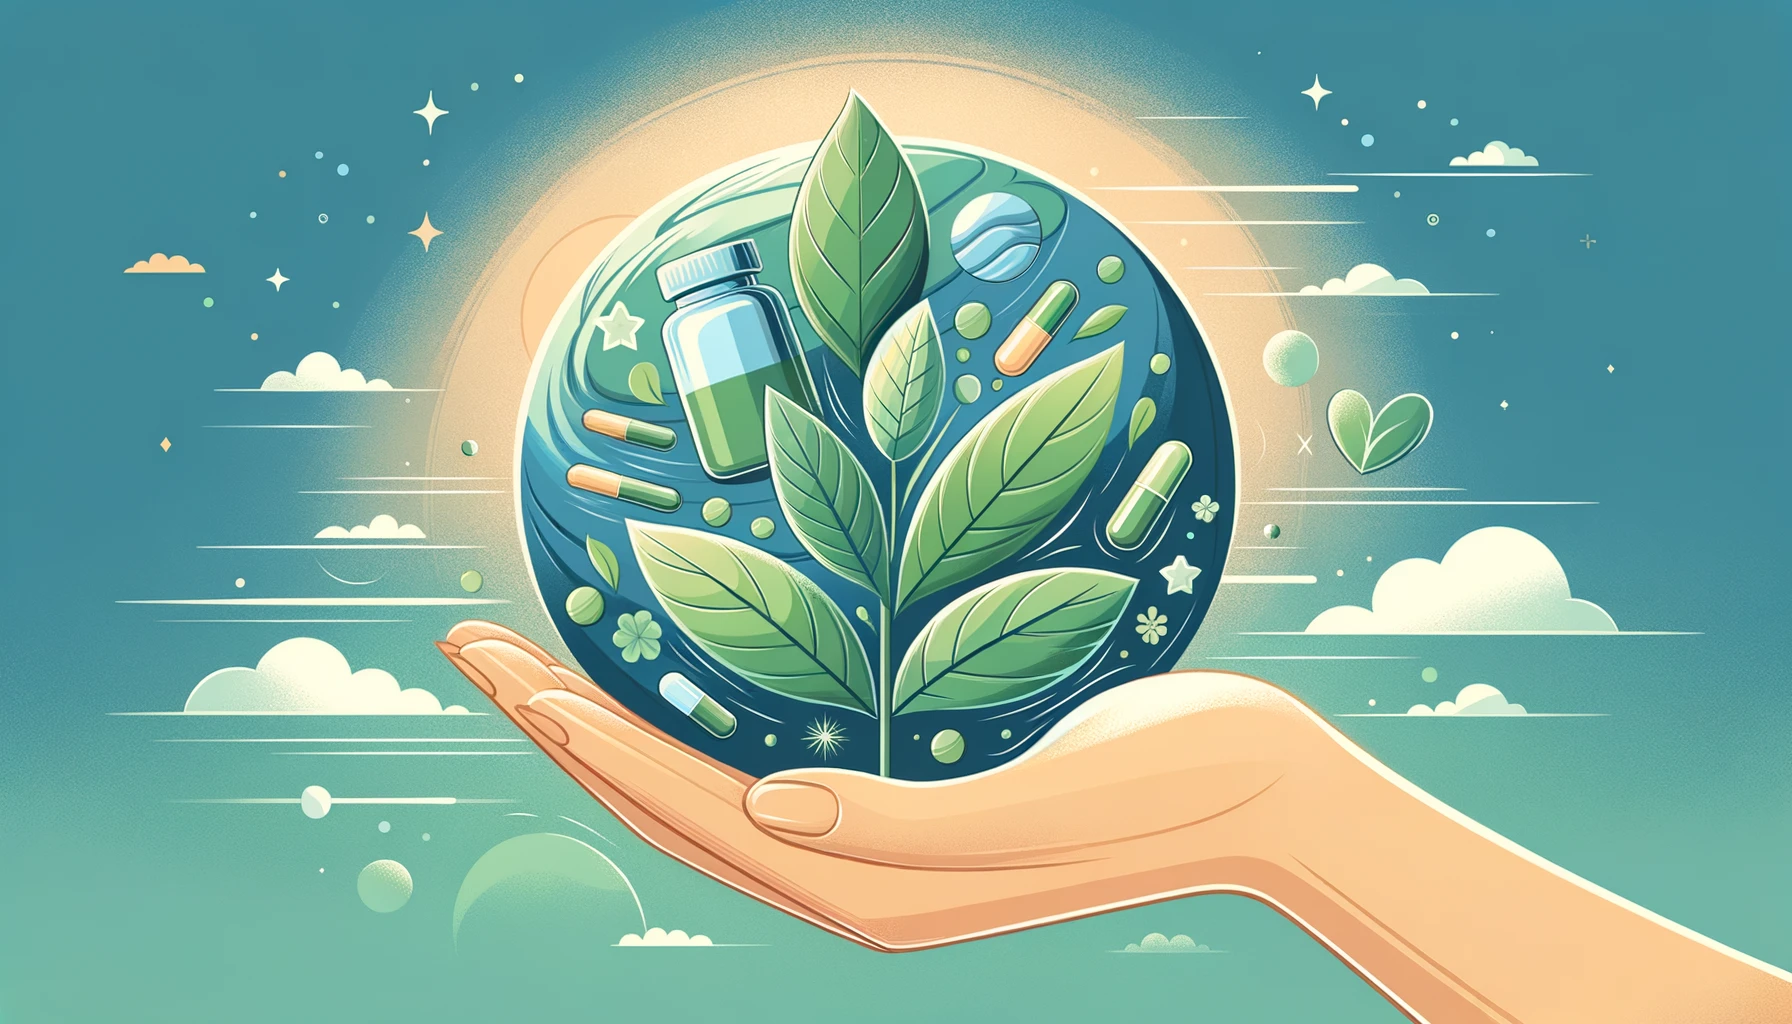 Illustrative concept of a hand holding a leaf sprouting organic supplements, with a stylized Earth in the background.